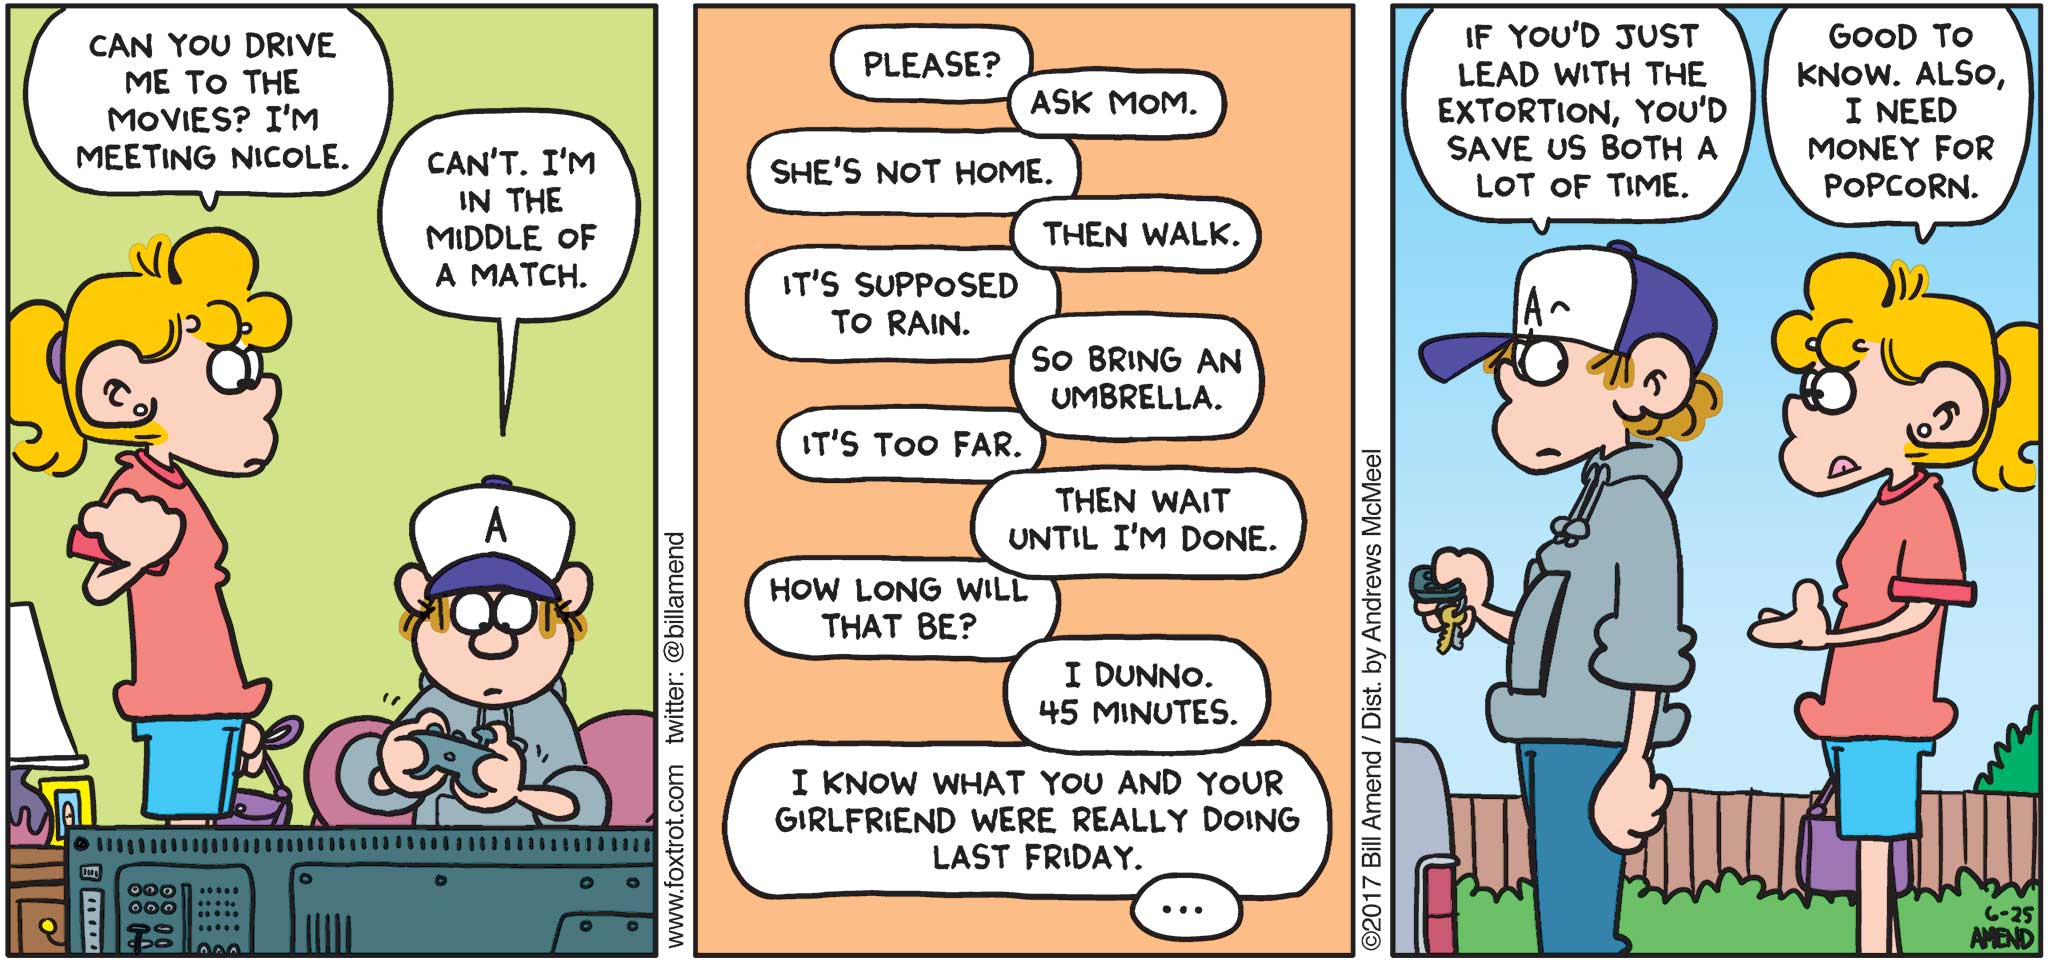 FoxTrot by Bill Amend - "End Game" published June 25, 2017 - Paige says: Can you drive me to the movies? I'm meeting Nicole. Peter says: Can't. I'm in the middle of a match. Paige says: Please. Peter says: Ask mom. Paige says: She's not home. Peter says: Then walk. Paige says: It's supposed to rain. Peter says: So bring an umbrella. Paige says: It's too far. Peter says: Then wait until I'm done. Paige says: How long will that be? Peter says: I dunno. 45 minutes. Paige says: I know what you and your girlfriend were really doing last Friday... Peter says: If you'd just lead with the extortion, you'd save us both a lot of time. Paige says: Good to know. Also, I need money for popcorn.